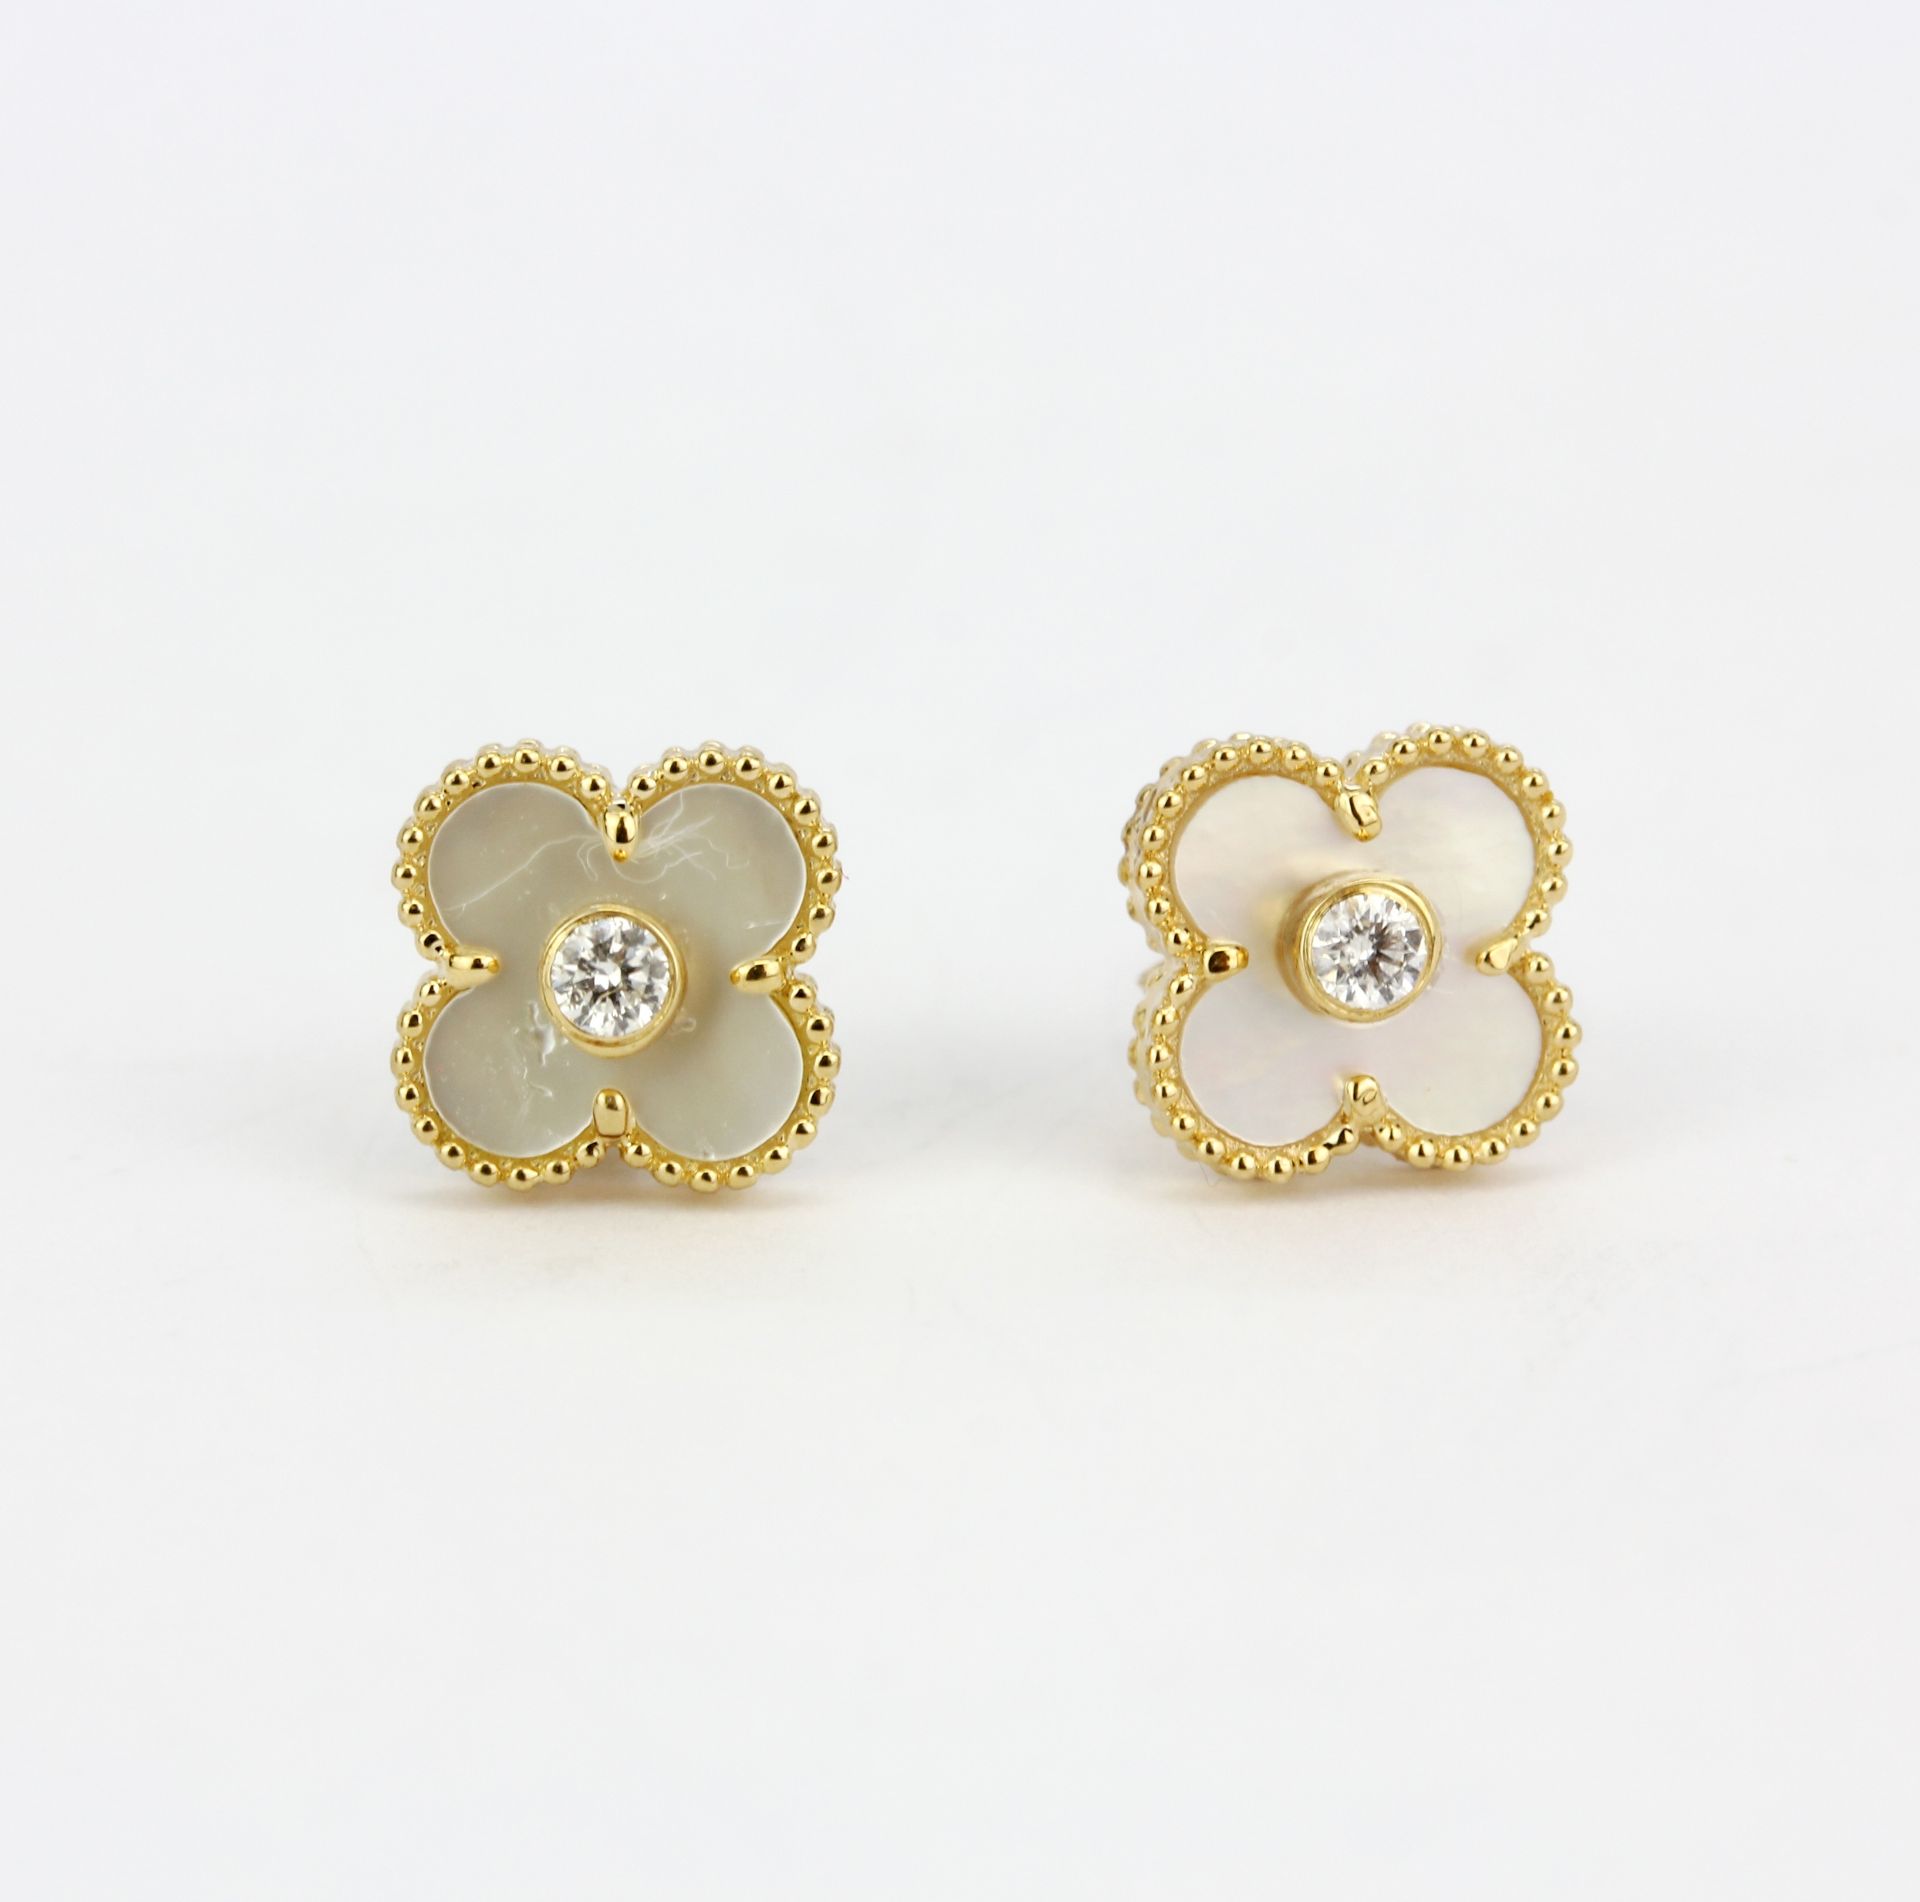 A pair of 18ct yellow gold (stamped 18K) stud earrings set with mother of pearl and a diamond, L.